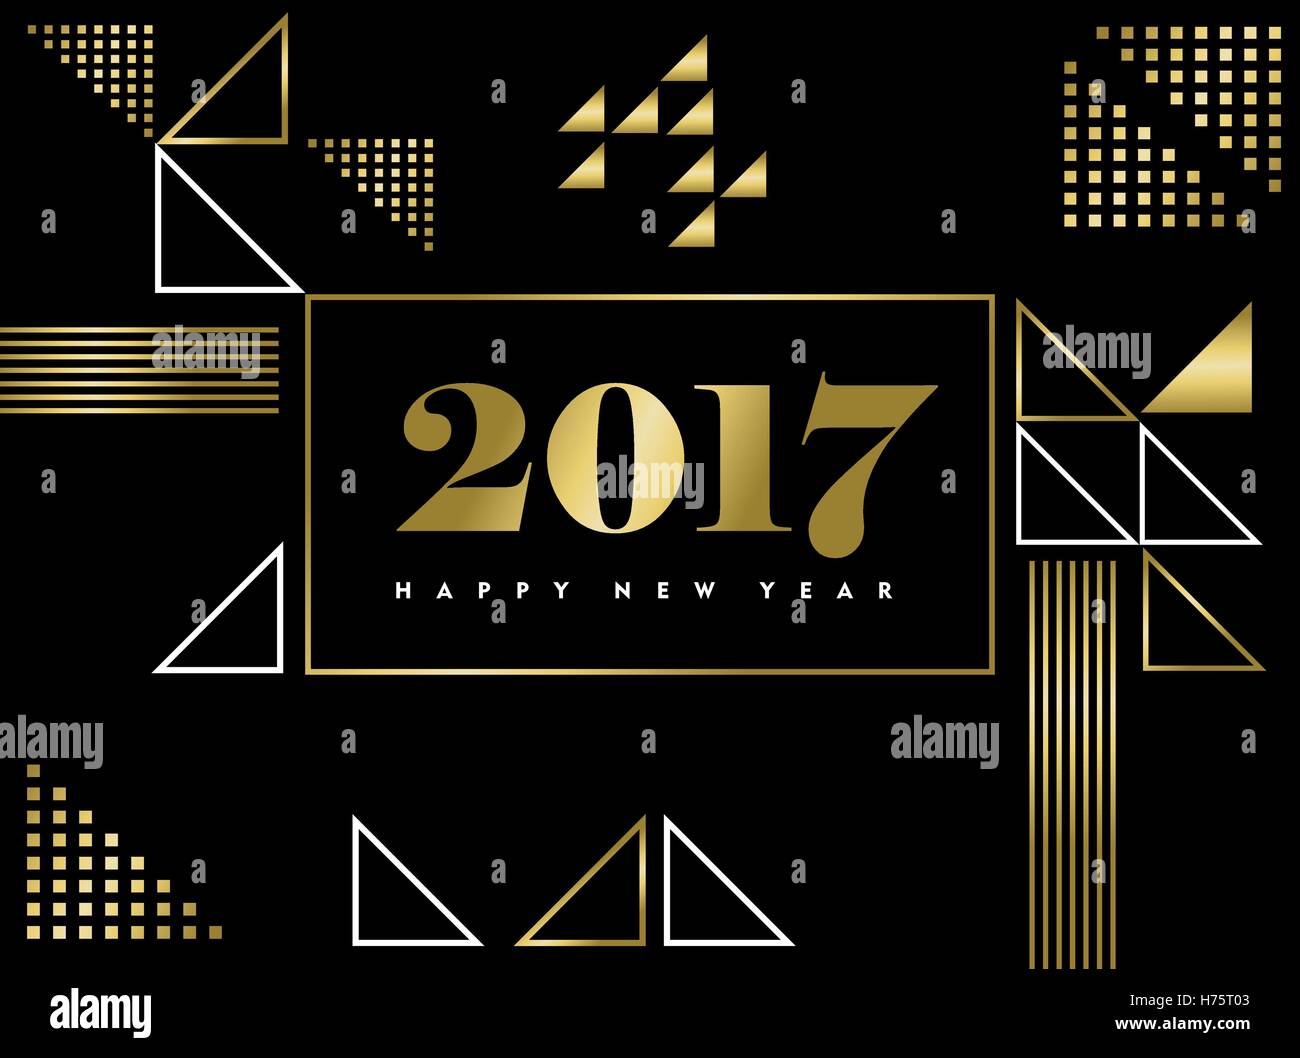 Gold Happy New Year 2017  modern greeting card design with geometric shapes background. EPS10 vector. Stock Vector